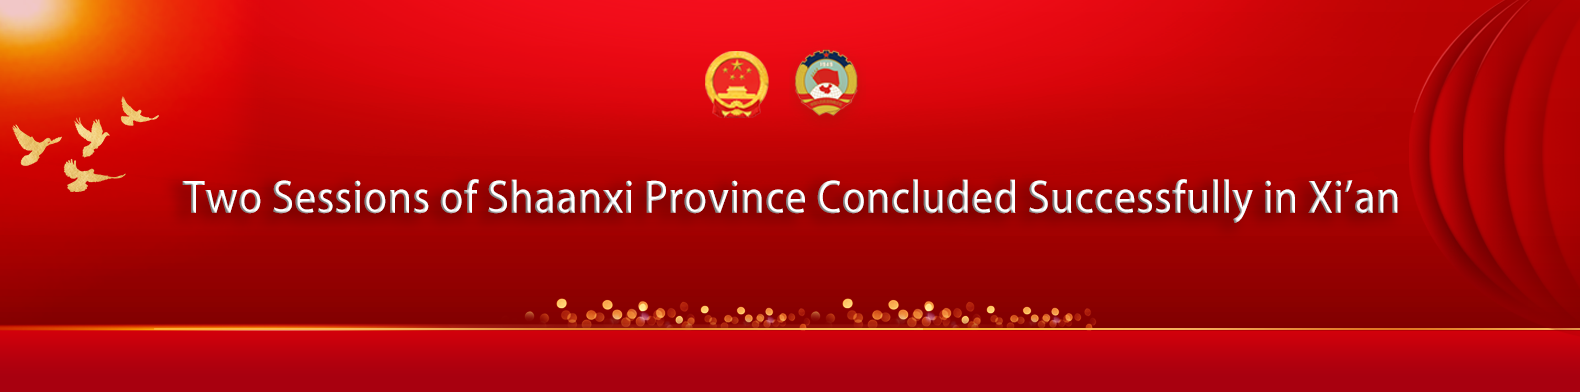 Two Sessions of Shaanxi Province Concluded Successfully in Xi'an